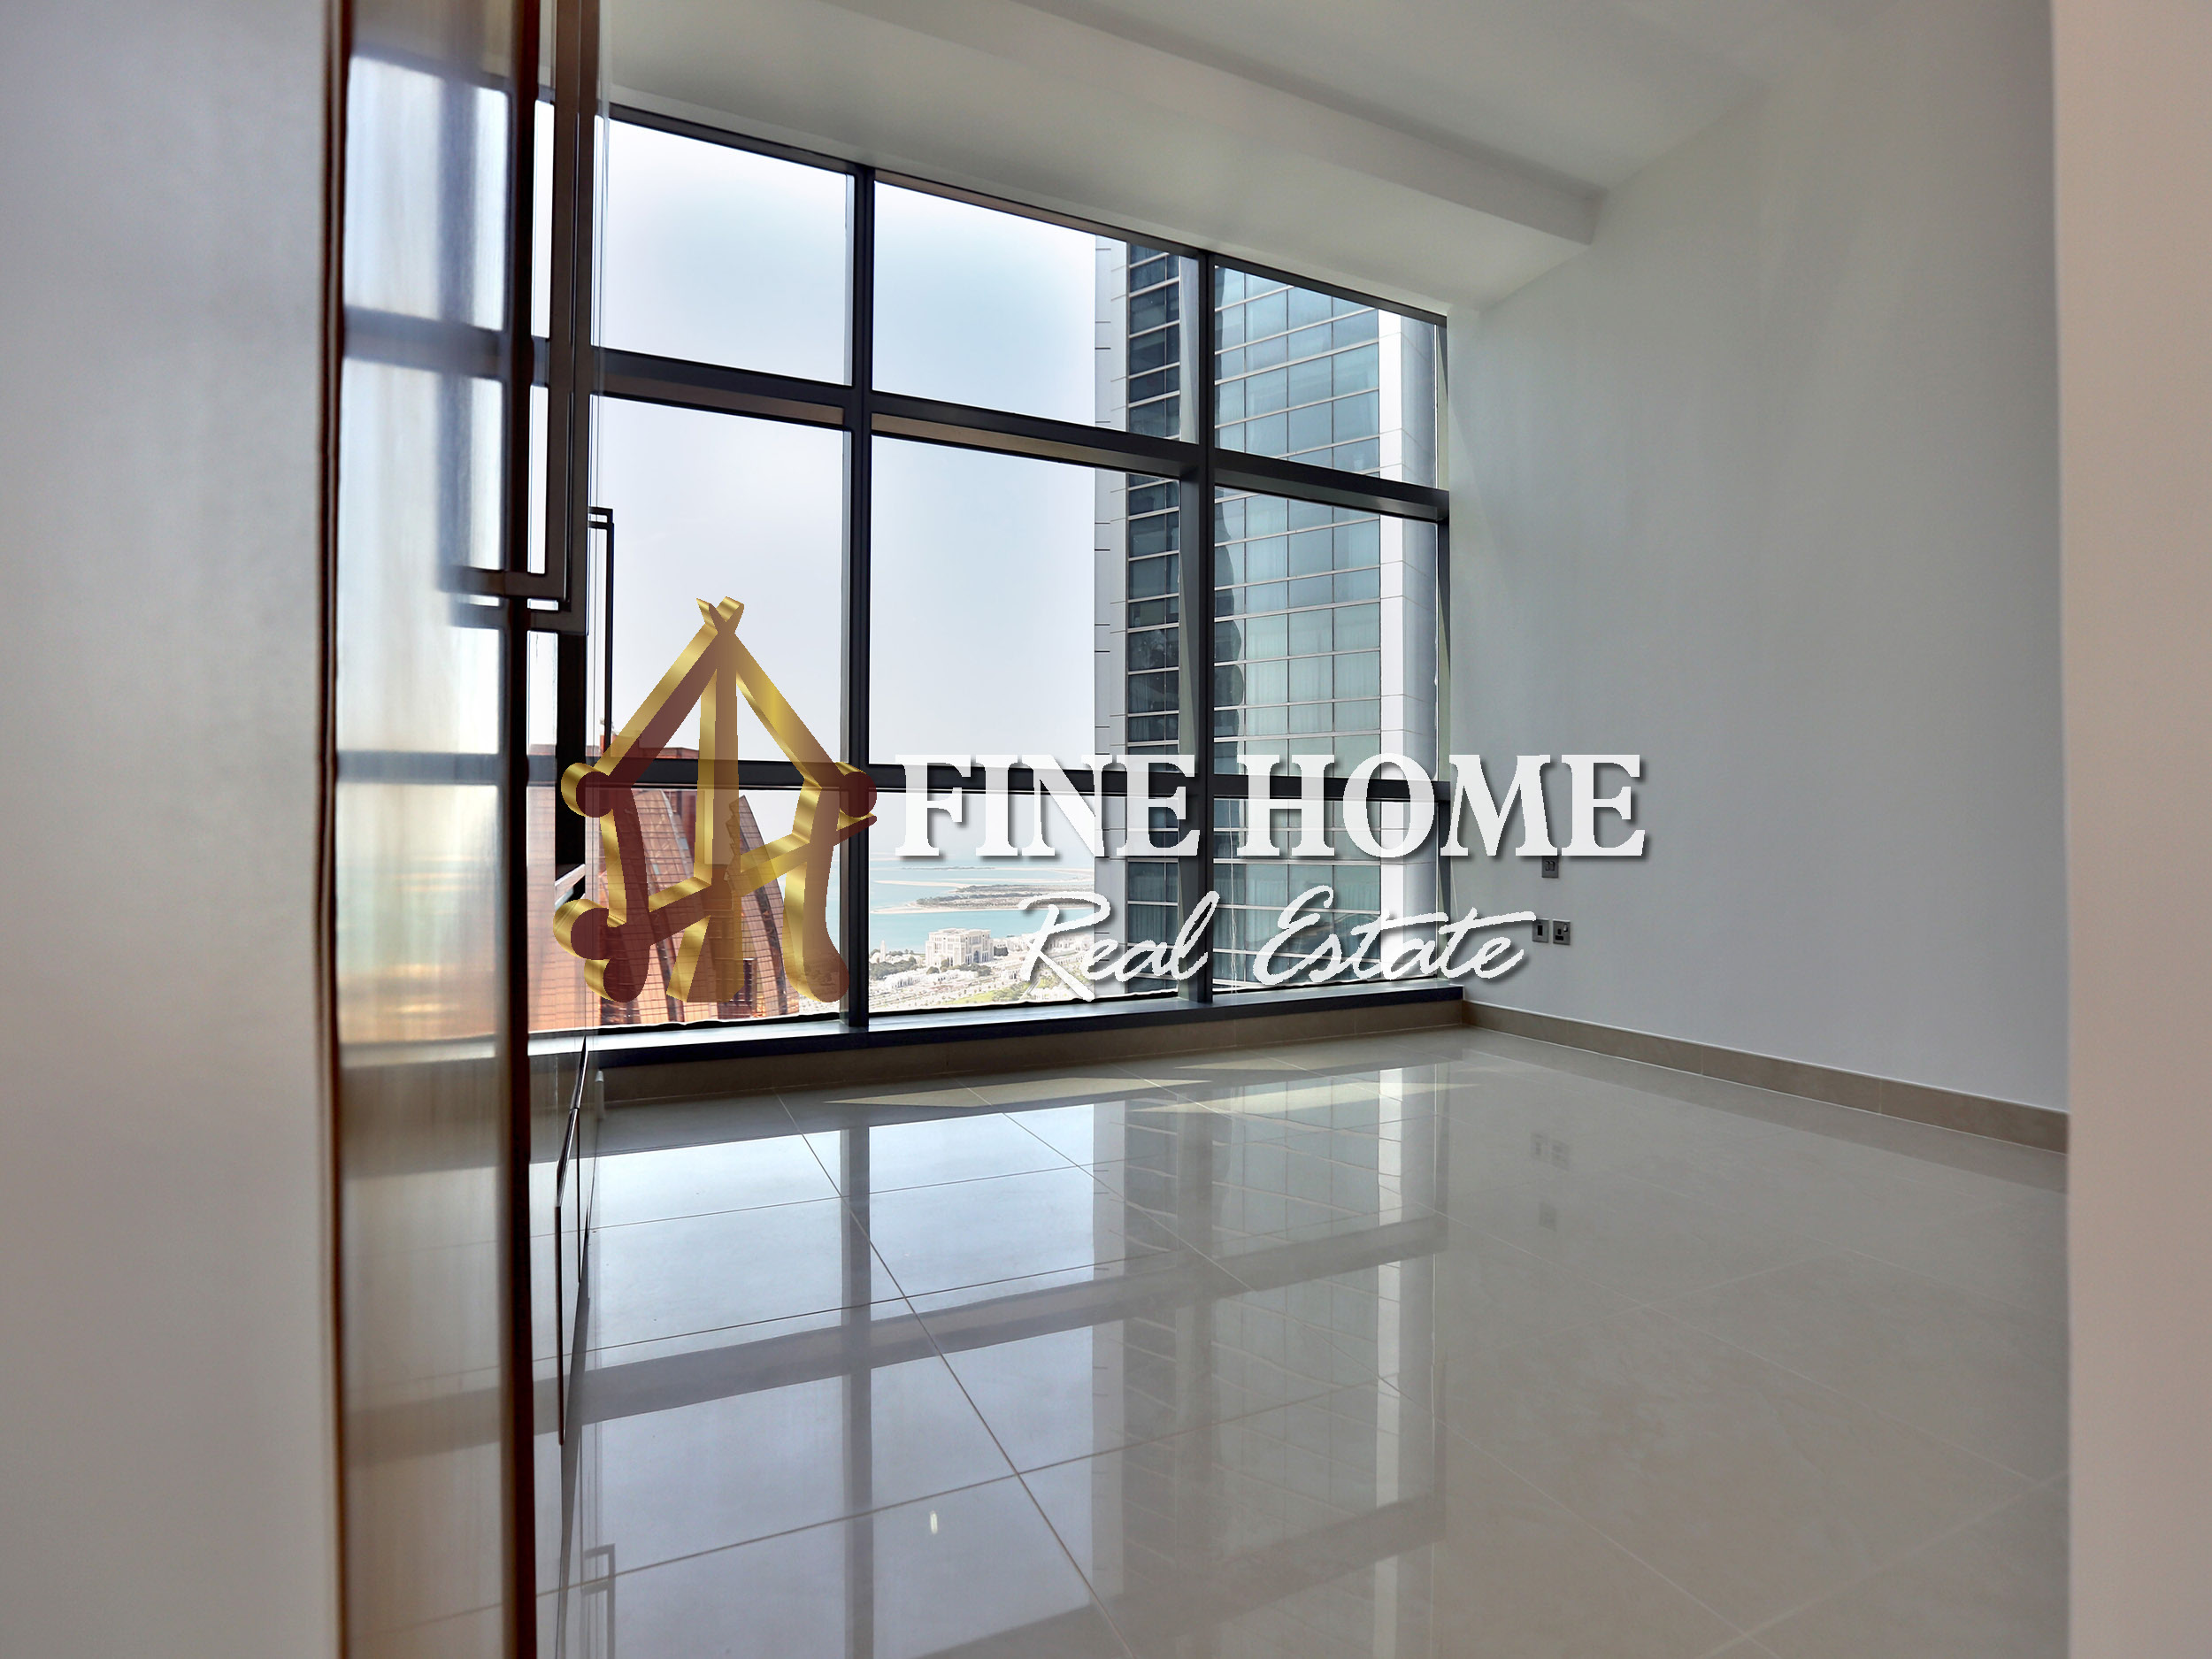 1 BR  Apartment For Rent in Etihad Towers, Corniche Road, Abu Dhabi - 4942962